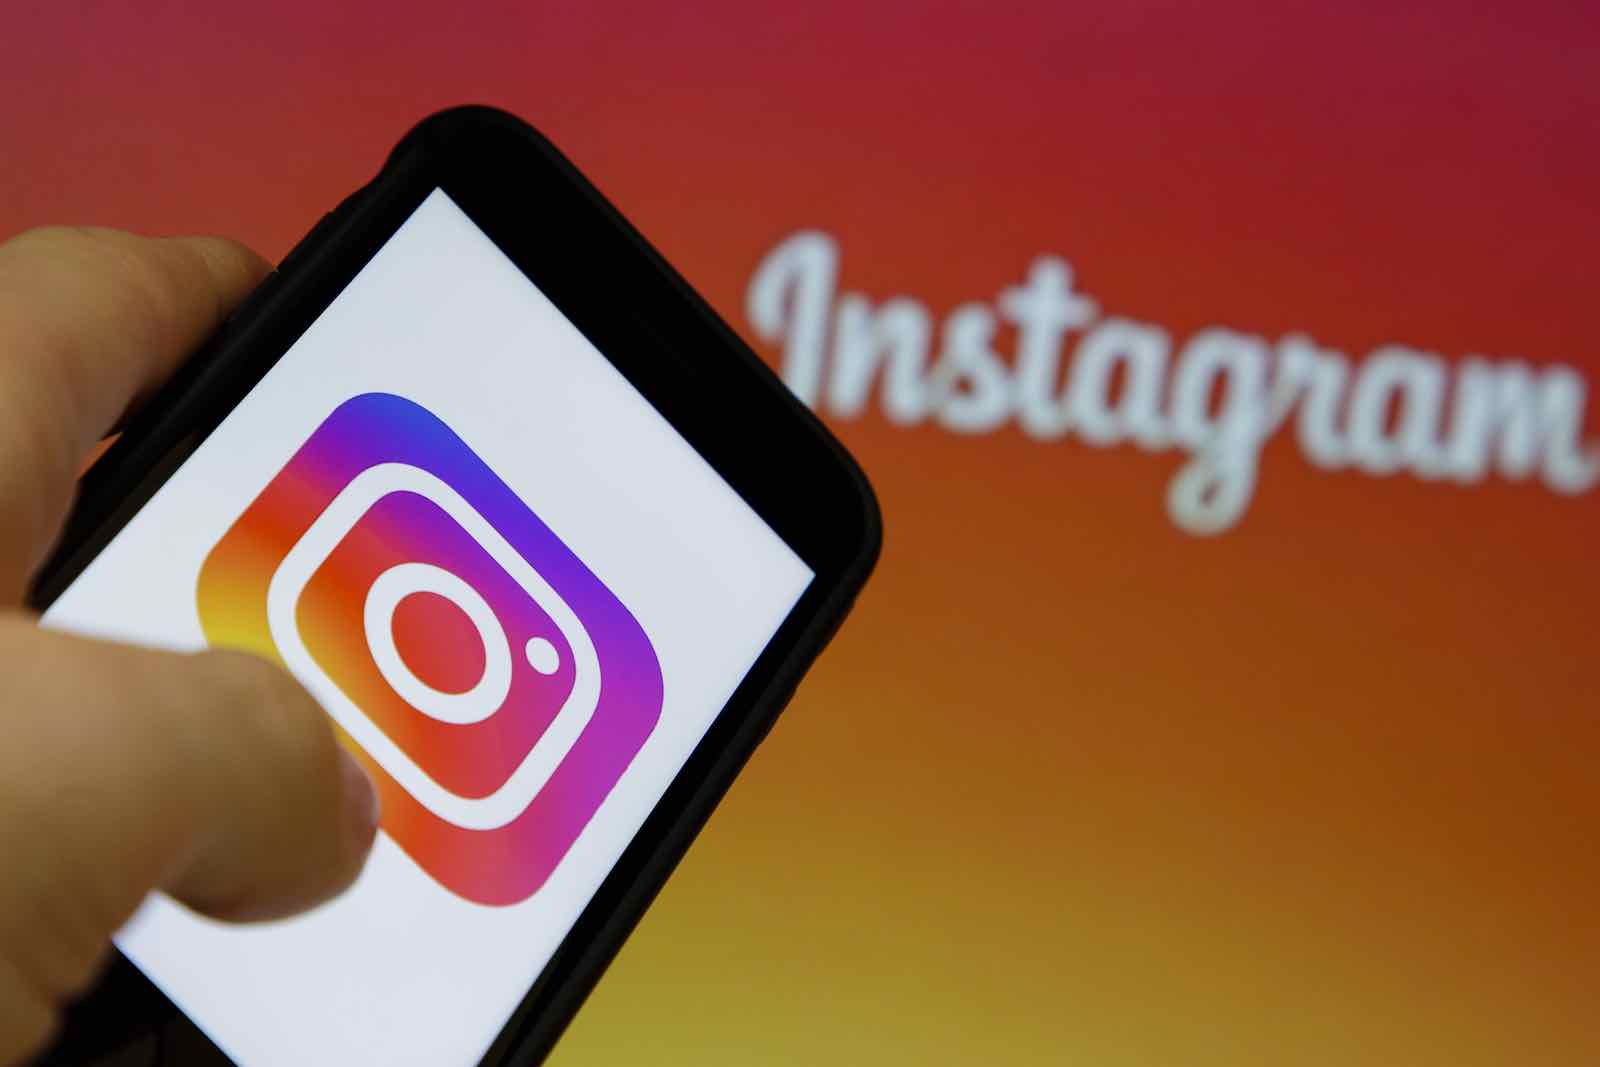 Instagram is setting up its own subscription service